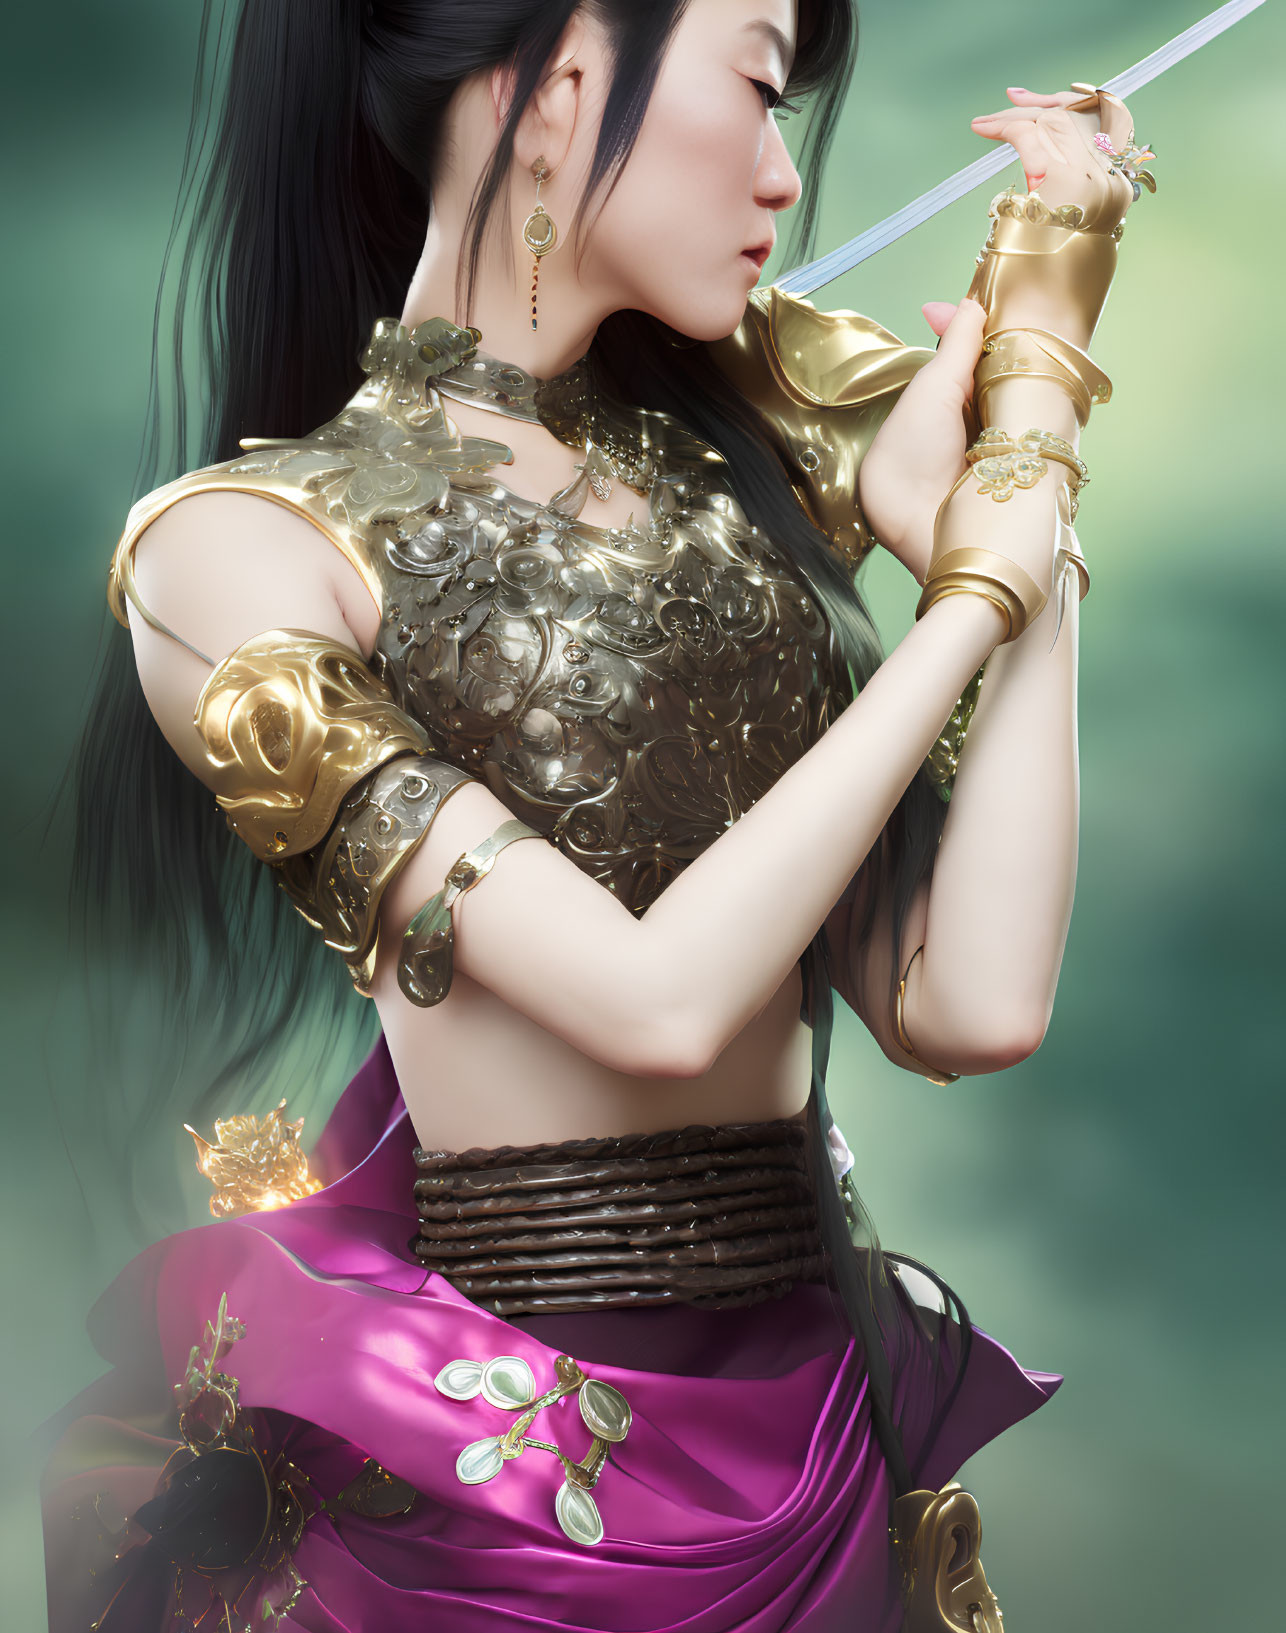 Fantasy woman in golden-accented armor holding a sword, gazing sideways in misty setting